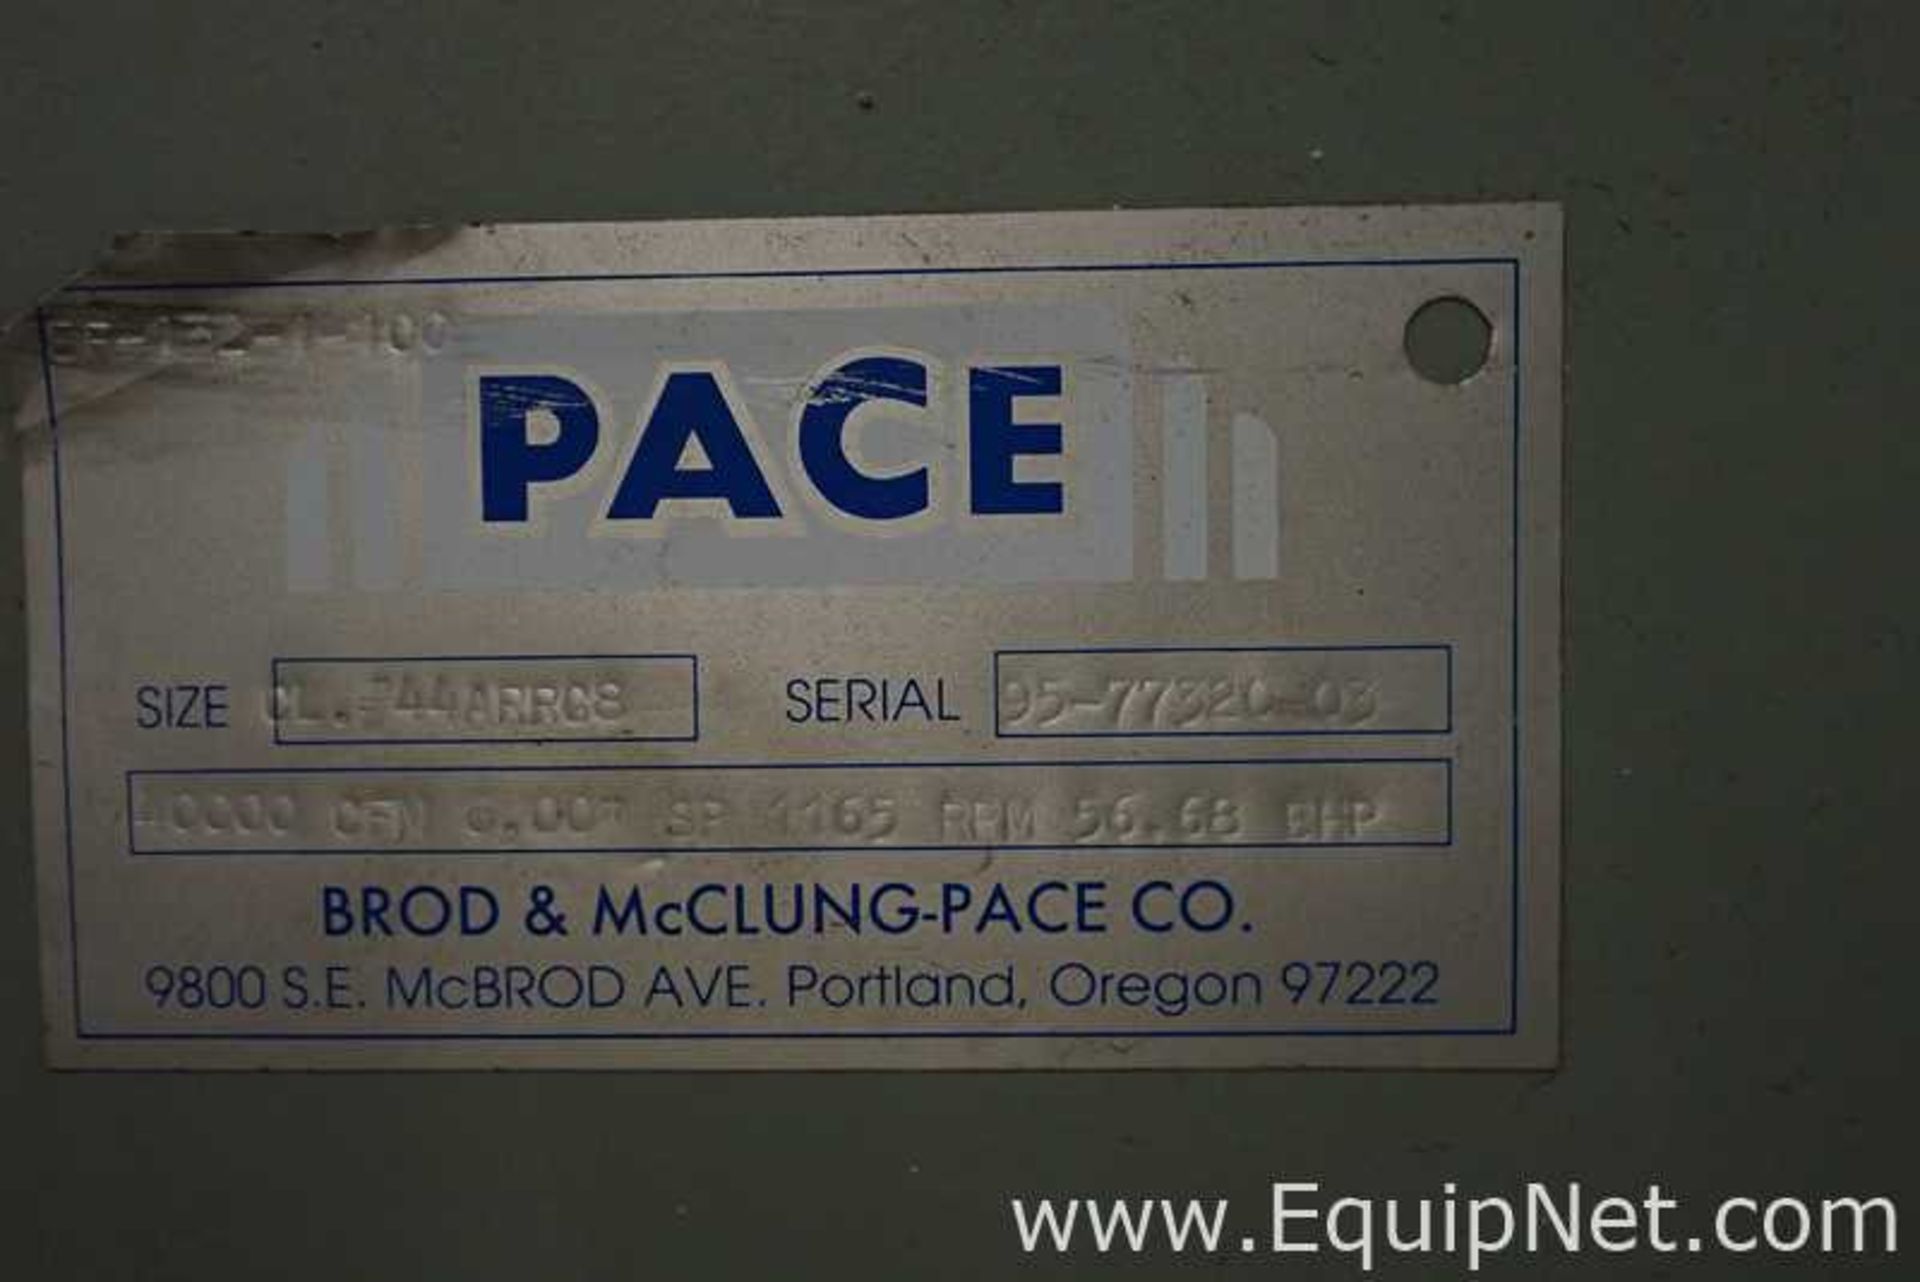 Pace Company CL 44ARRG8 General Air Handler Fan and Motor - Image 46 of 54